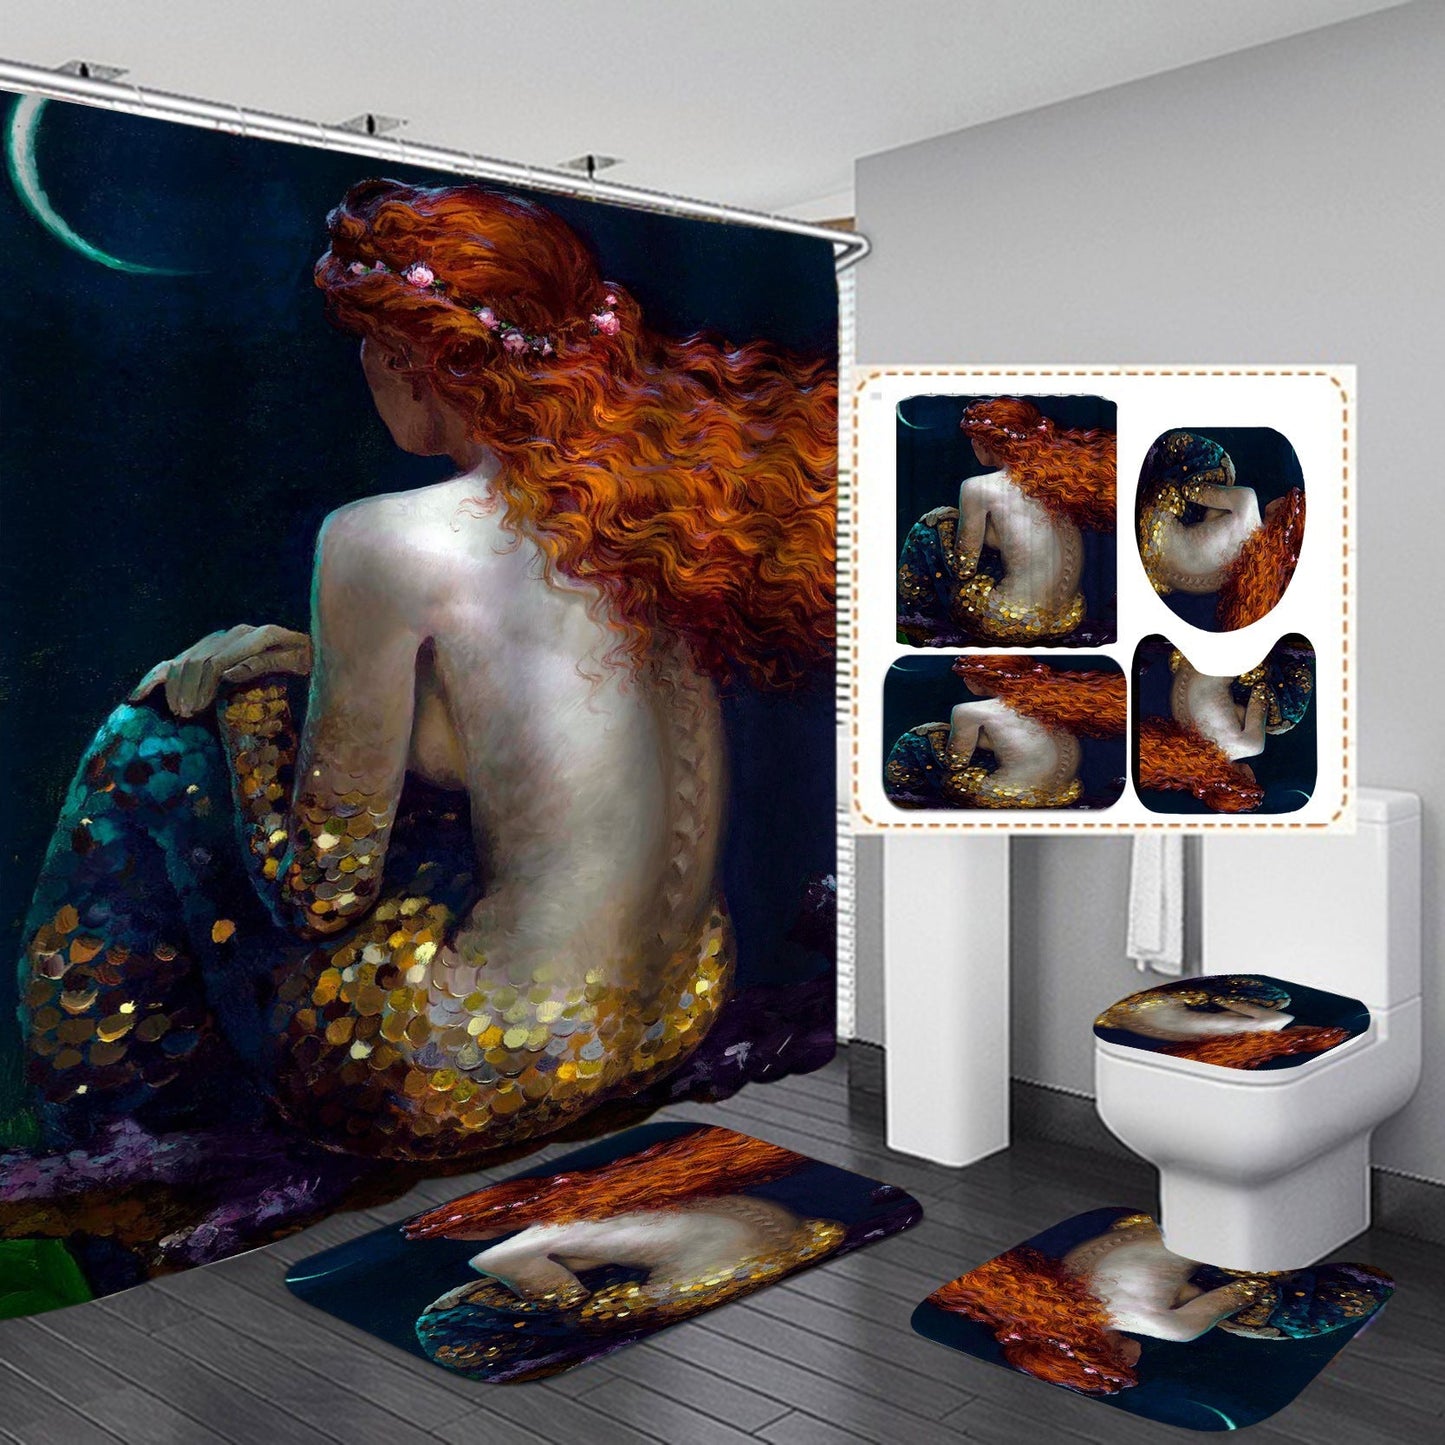 Cartoon Mermaid Design Shower Curtain Bathroom SetsNon-Slip Toilet Lid Cover-Shower Curtain-180×180cm Shower Curtain Only-6-Free Shipping Leatheretro